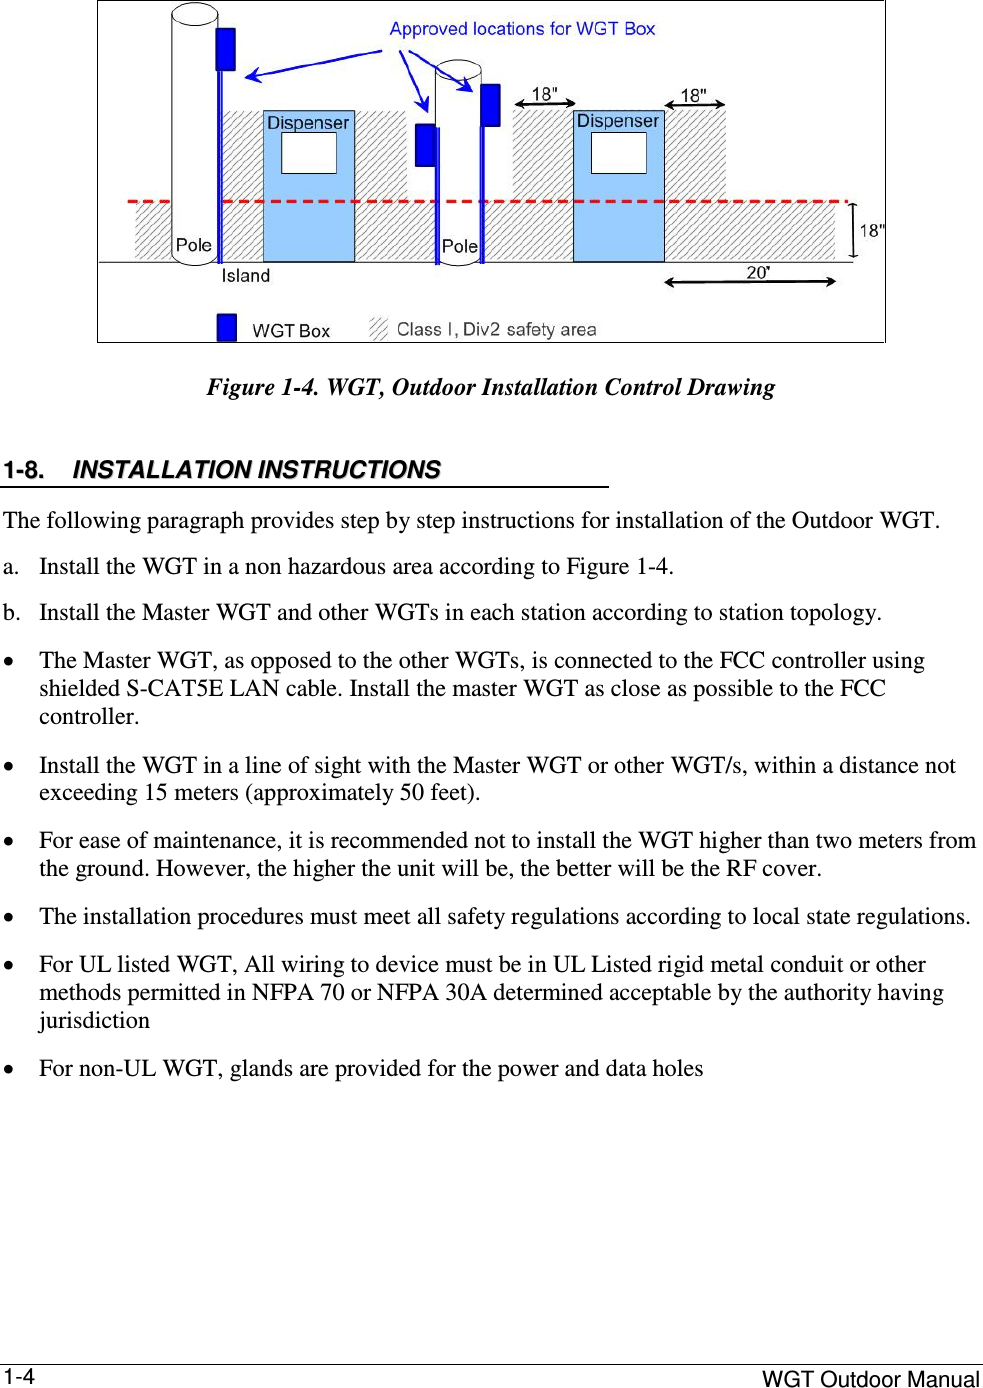     WGT Outdoor Manual  1-4  Figure  1-4. WGT, Outdoor Installation Control Drawing 11--88..  IINNSSTTAALLLLAATTIIOONN  IINNSSTTRRUUCCTTIIOONNSS  The following paragraph provides step by step instructions for installation of the Outdoor WGT. a. Install the WGT in a non hazardous area according to Figure  1-4. b. Install the Master WGT and other WGTs in each station according to station topology. • The Master WGT, as opposed to the other WGTs, is connected to the FCC controller using shielded S-CAT5E LAN cable. Install the master WGT as close as possible to the FCC controller. • Install the WGT in a line of sight with the Master WGT or other WGT/s, within a distance not exceeding 15 meters (approximately 50 feet). • For ease of maintenance, it is recommended not to install the WGT higher than two meters from the ground. However, the higher the unit will be, the better will be the RF cover. • The installation procedures must meet all safety regulations according to local state regulations. • For UL listed WGT, All wiring to device must be in UL Listed rigid metal conduit or other methods permitted in NFPA 70 or NFPA 30A determined acceptable by the authority having jurisdiction  • For non-UL WGT, glands are provided for the power and data holes     